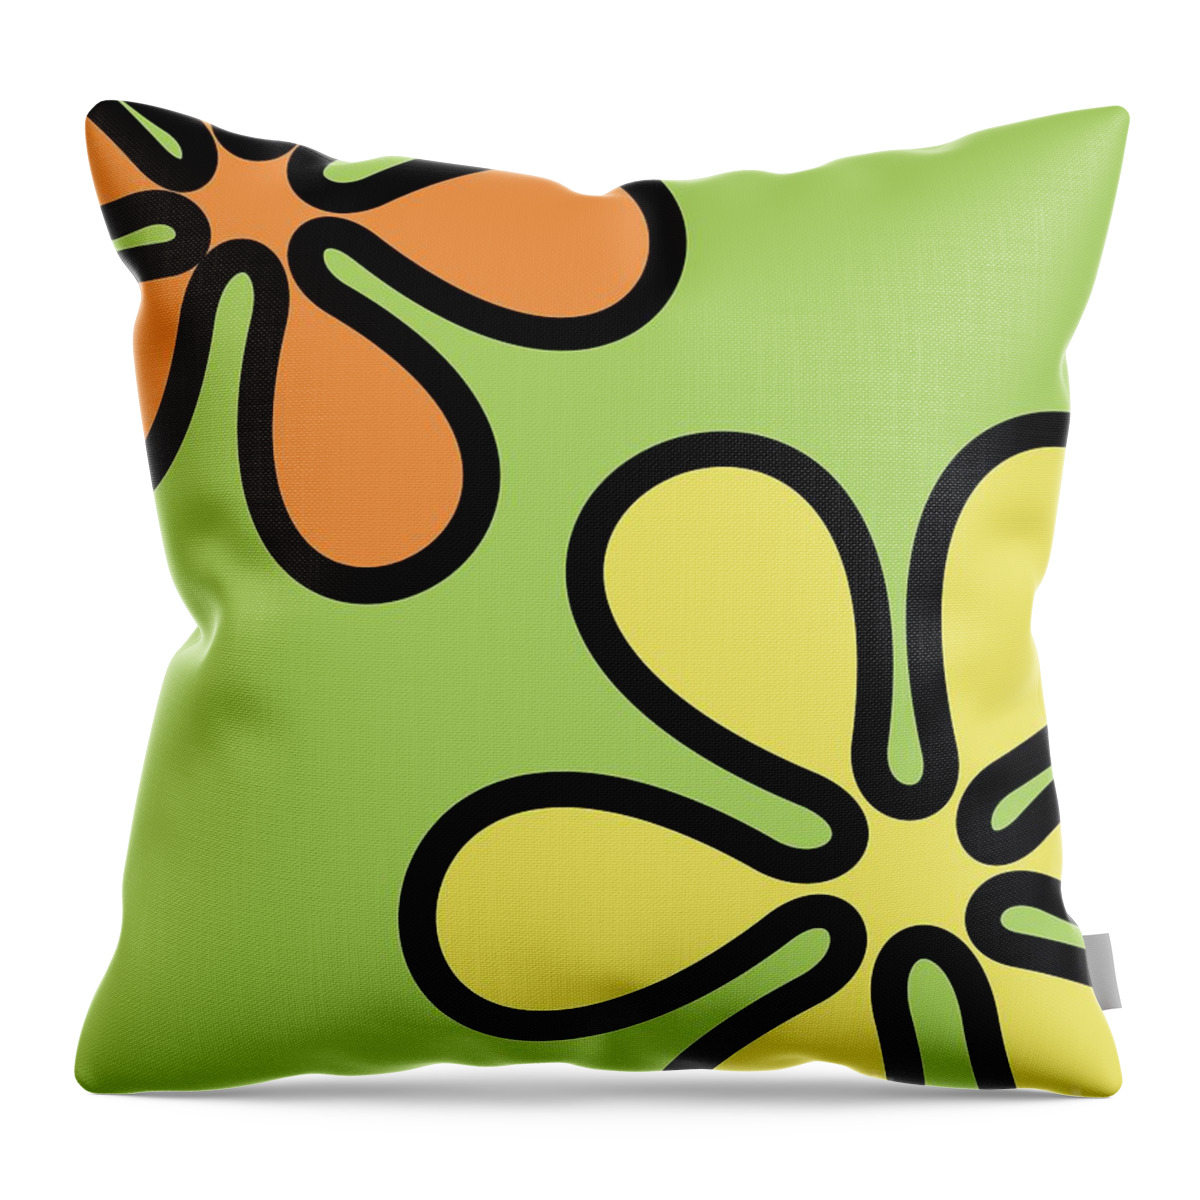 Mod Throw Pillow featuring the digital art Mod Flowers on Green by Donna Mibus